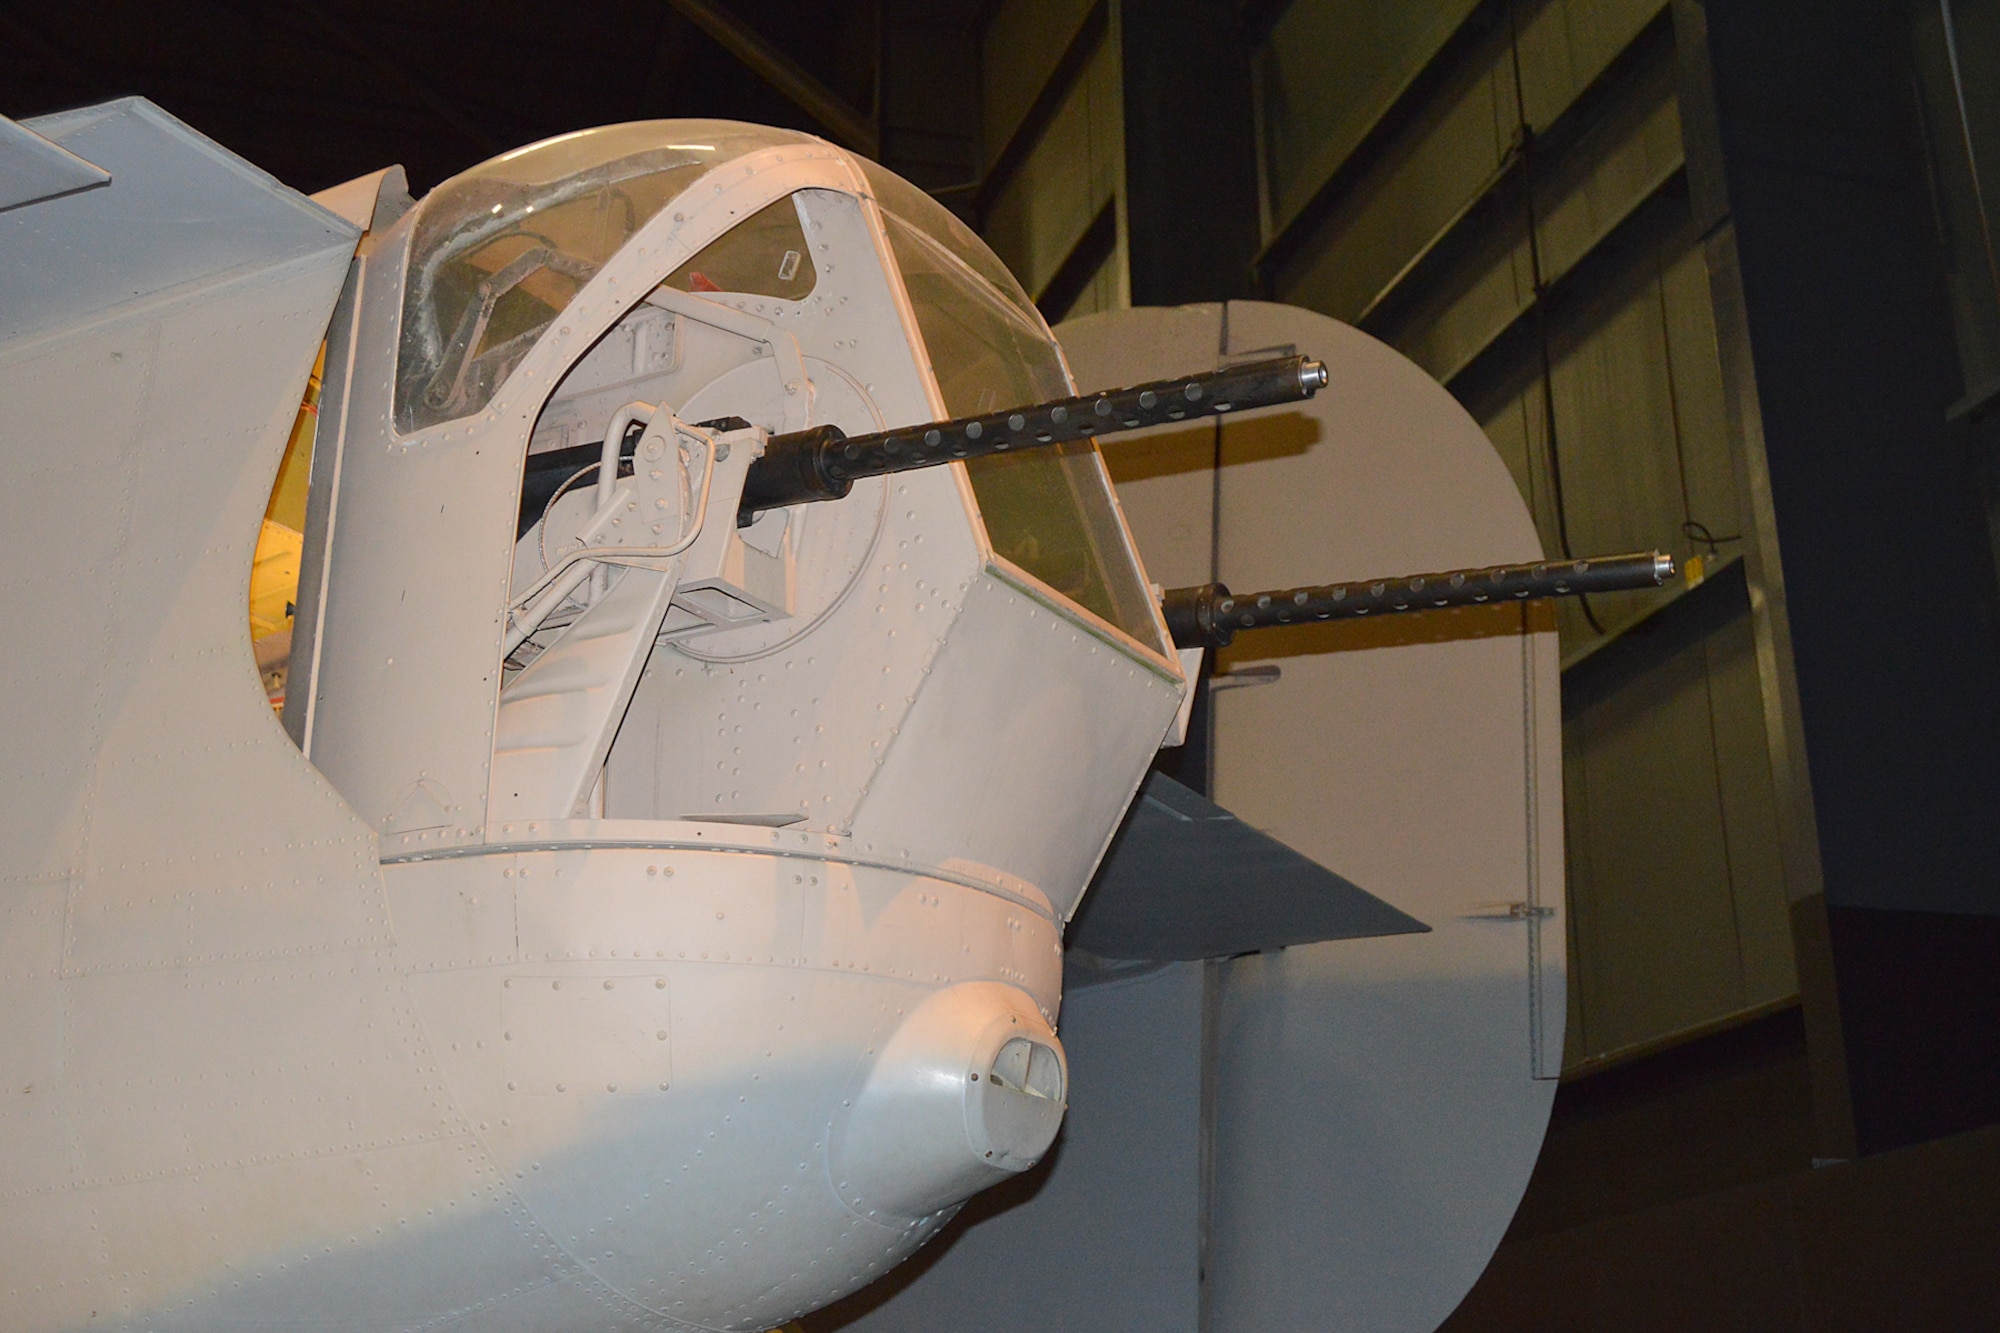 DAYTON, Ohio - Consolidated B-24D tail gun at the National Museum of the U.S. Air Force. (U.S. Air Force photo)
